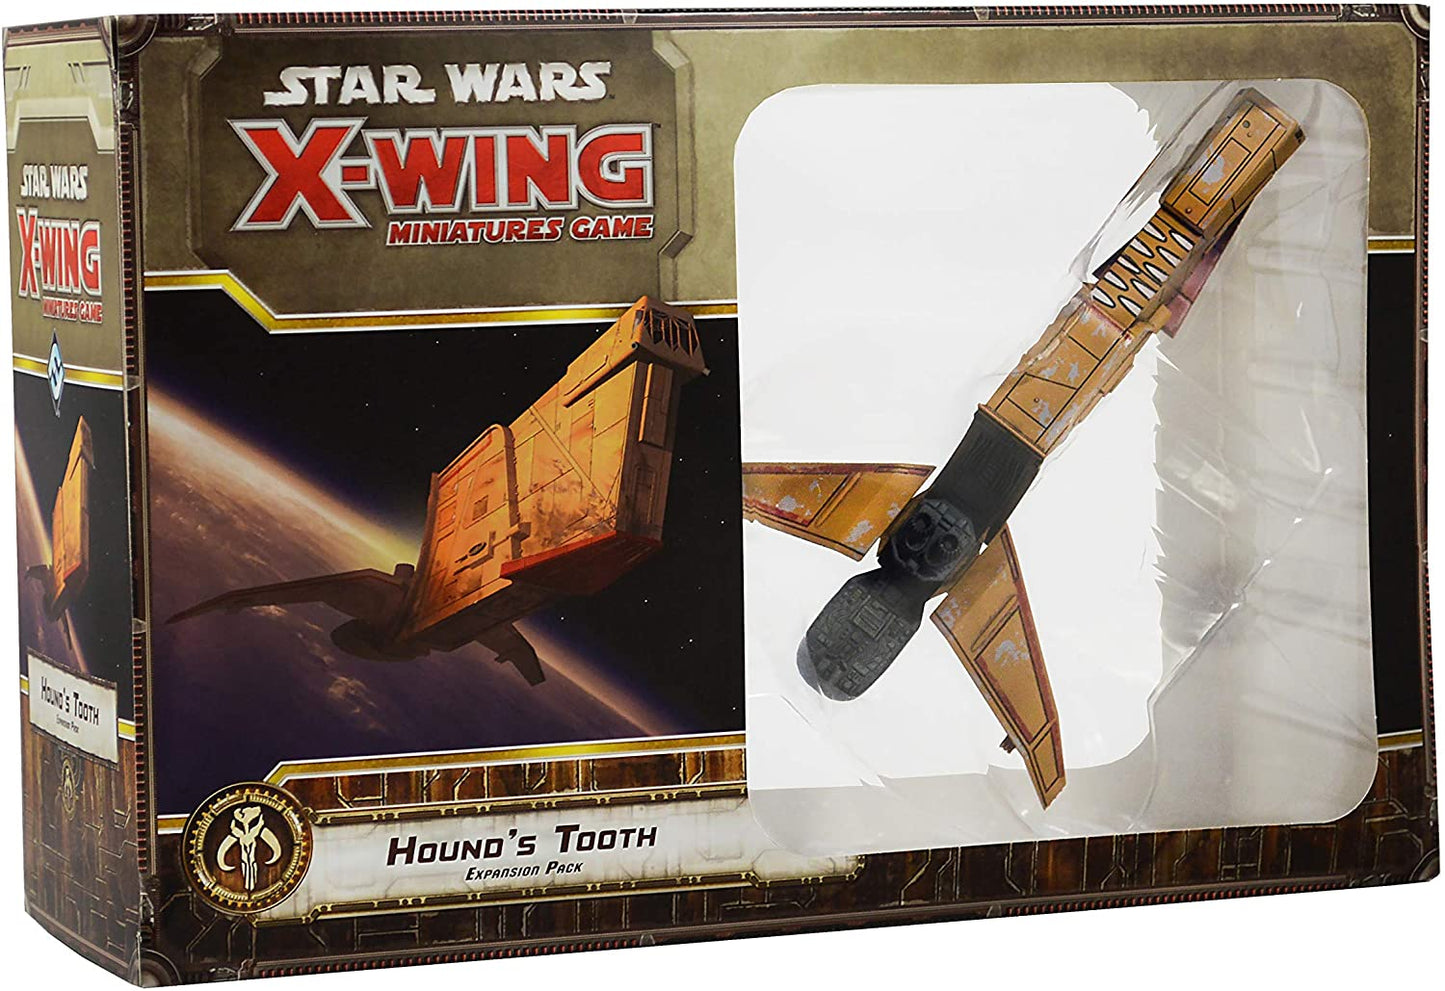 HOUND'S TOOTH (STAR WARS X-WING)